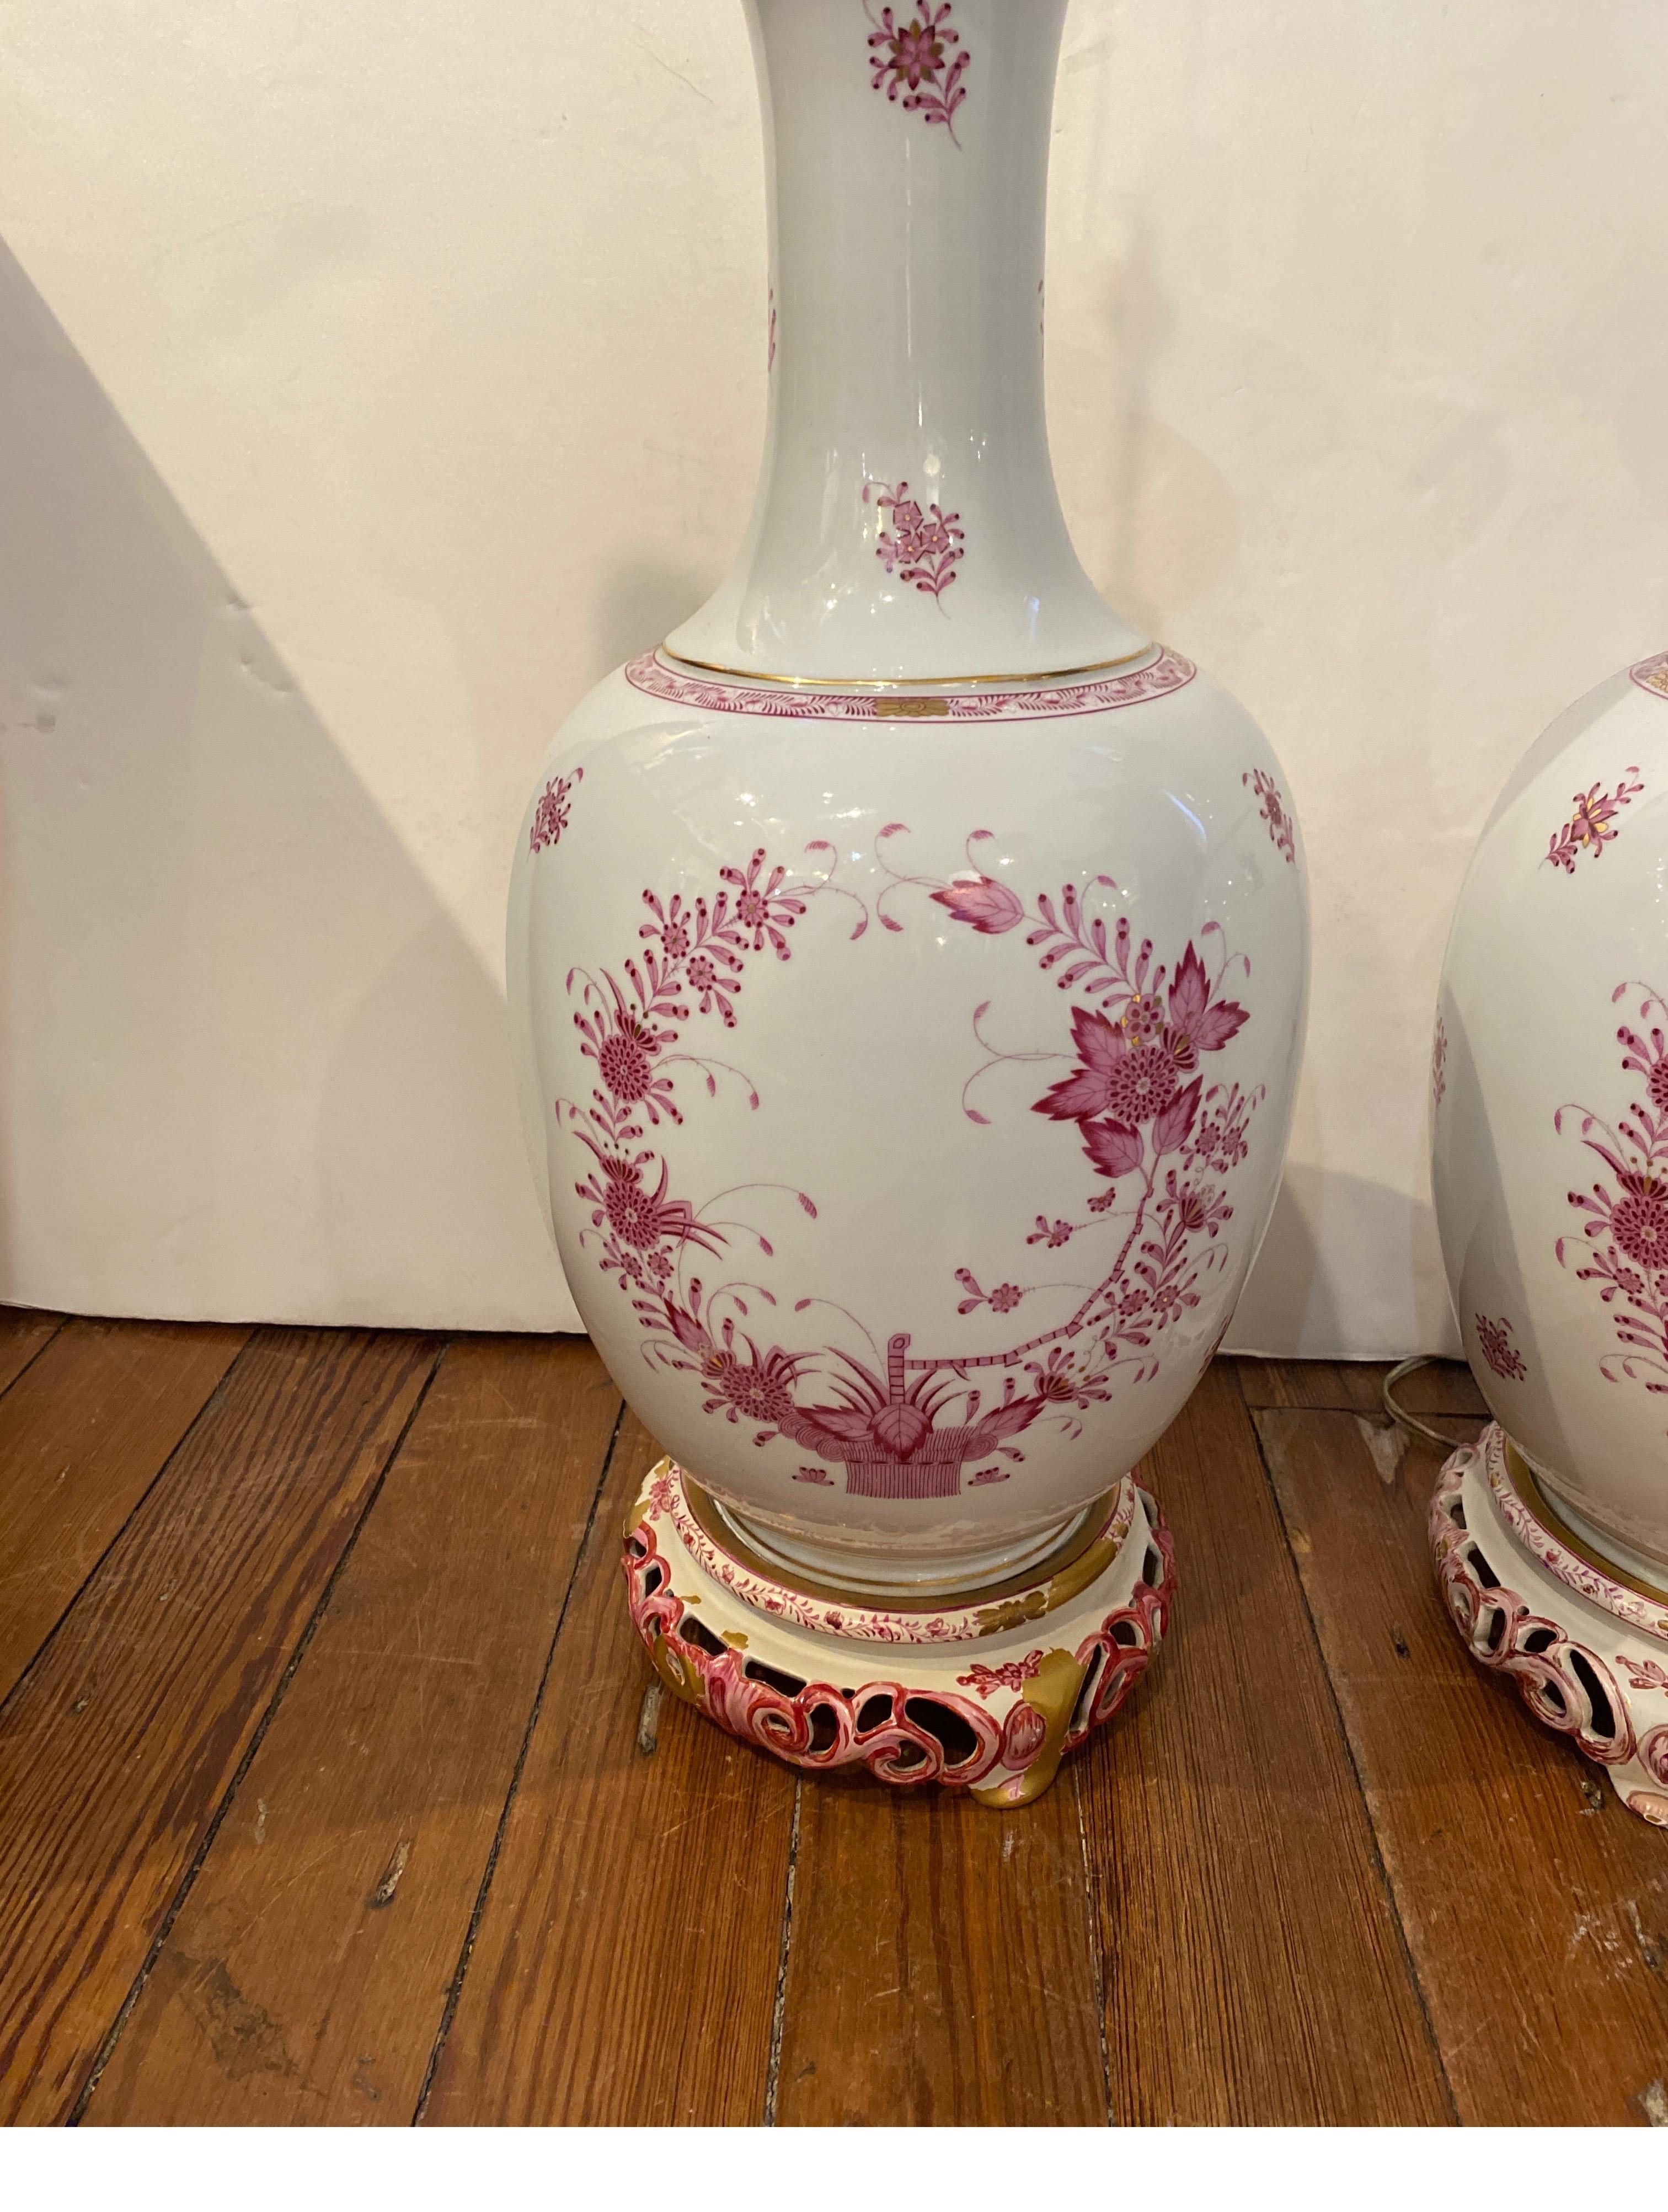 Beautiful hand painted Herand porcelain lamps with hand painted bases. The bulbous white porcelain lamps with hand painted floral decoration all over, the bases were custom made with some minor flaking to just the bases. Marked with a faint blue